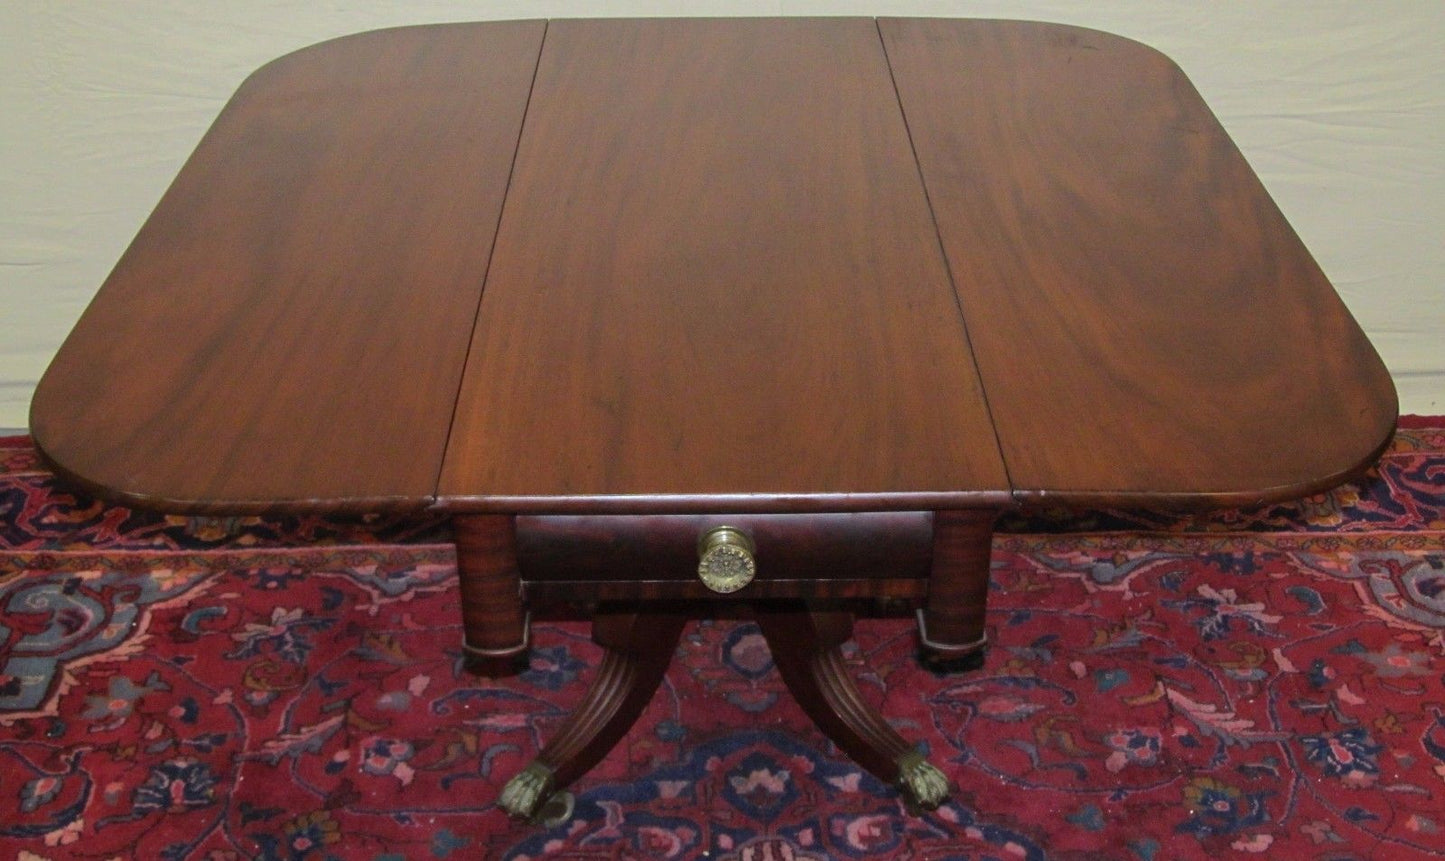 EARLY 19TH CENTURY LATE FEDERAL SOLID BOOKMATCHED MAHOGANY BREAKFAST TABLE